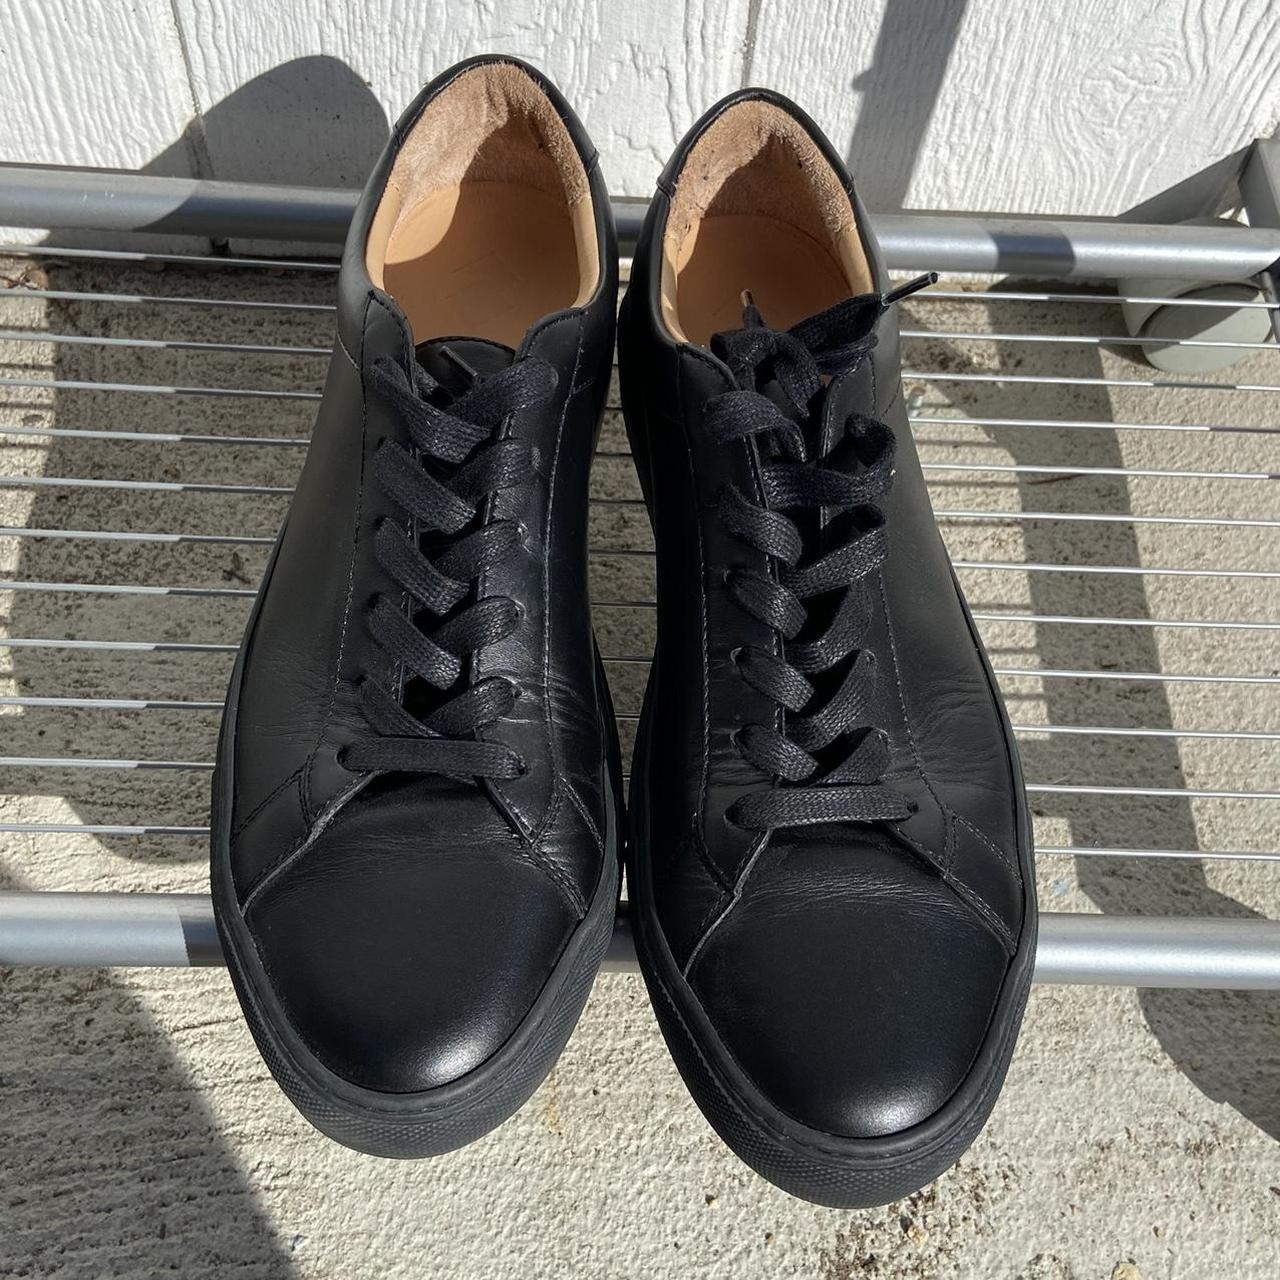 Black leather Koio shoes Size 44 / US 11 In great... - Depop